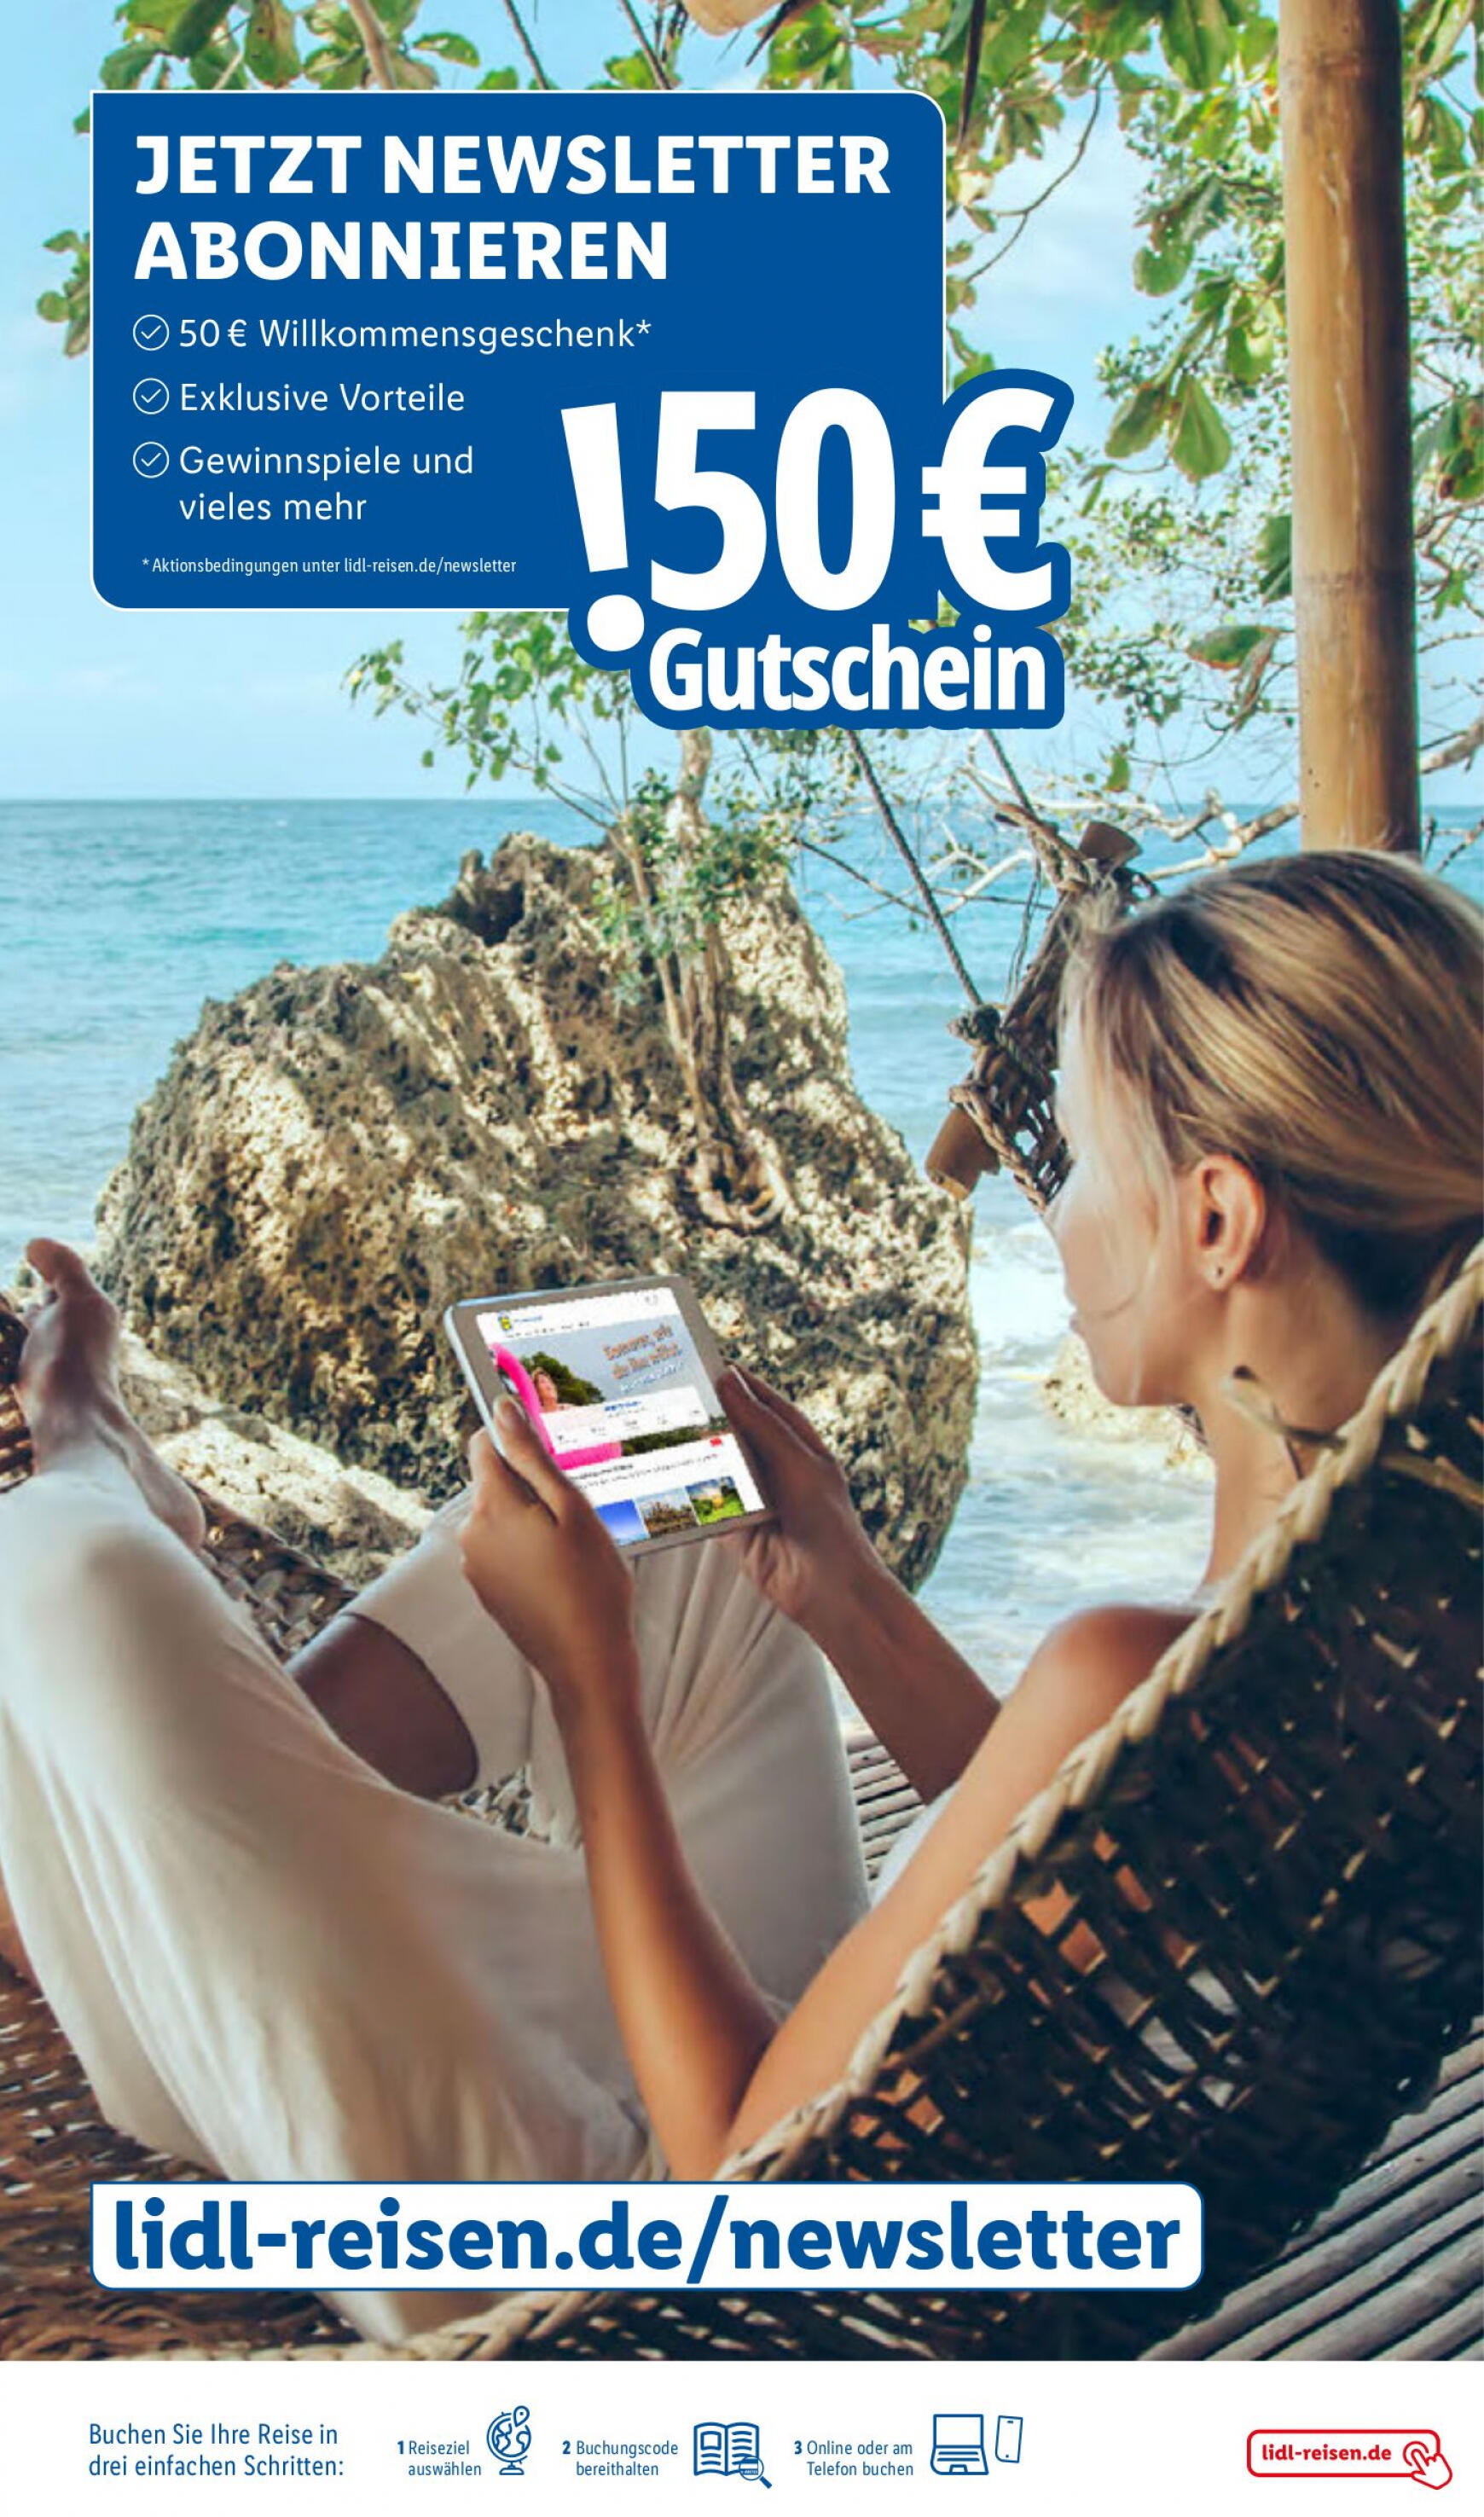 lidl - Flyer Lidl - April Reise-Highlights aktuell 27.03. - 30.04. - page: 29